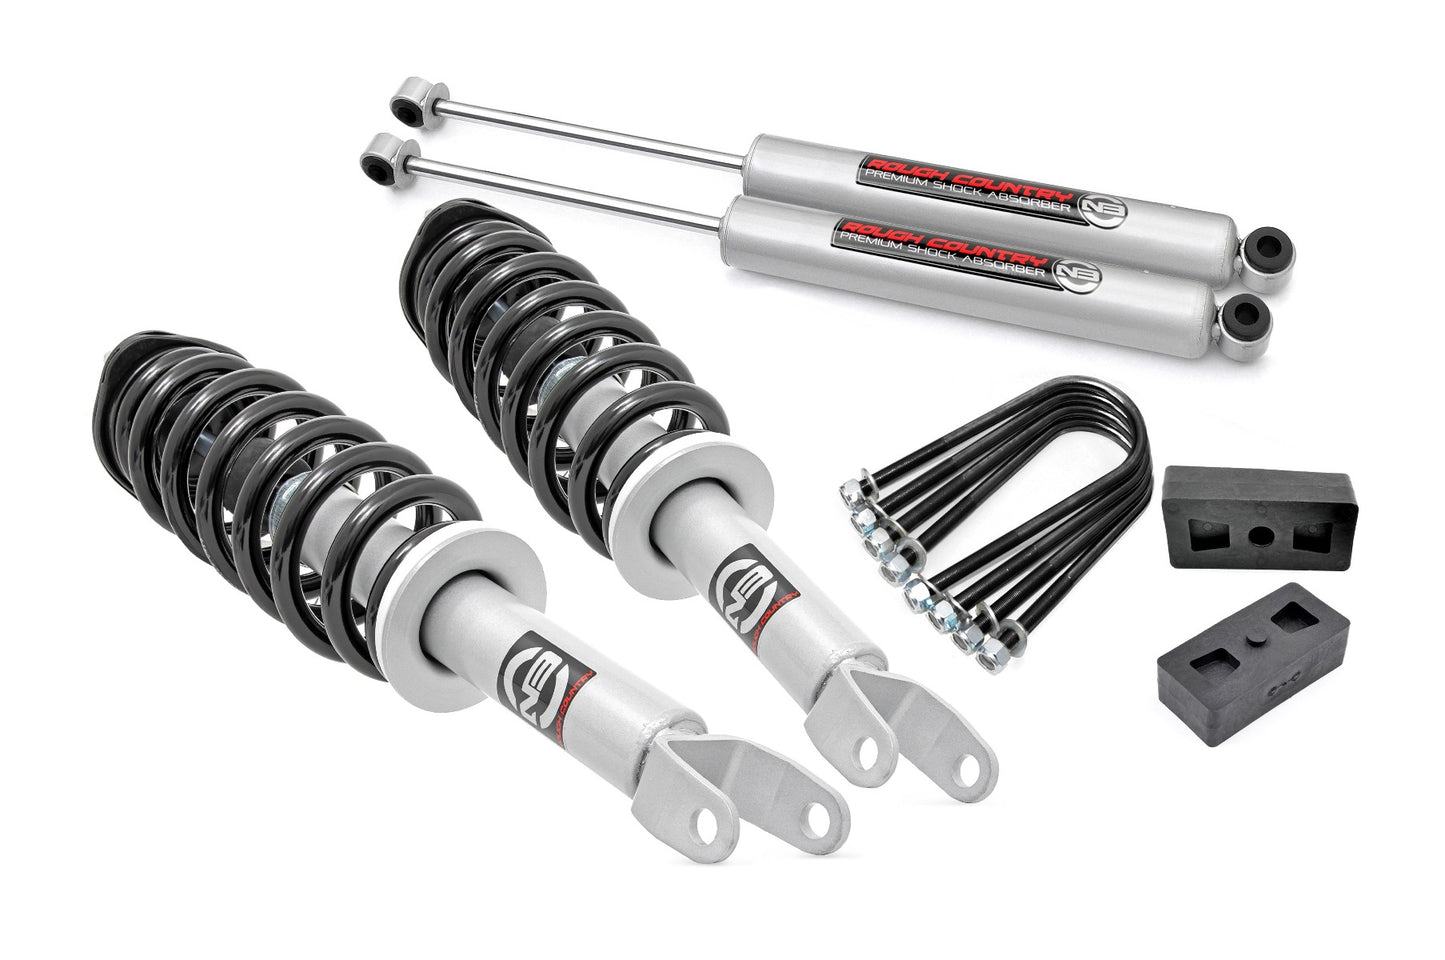 Rough Country (395.23) 2.5 Inch Lift Kit | N3 Struts | Dodge 1500 4WD (2006-2008)